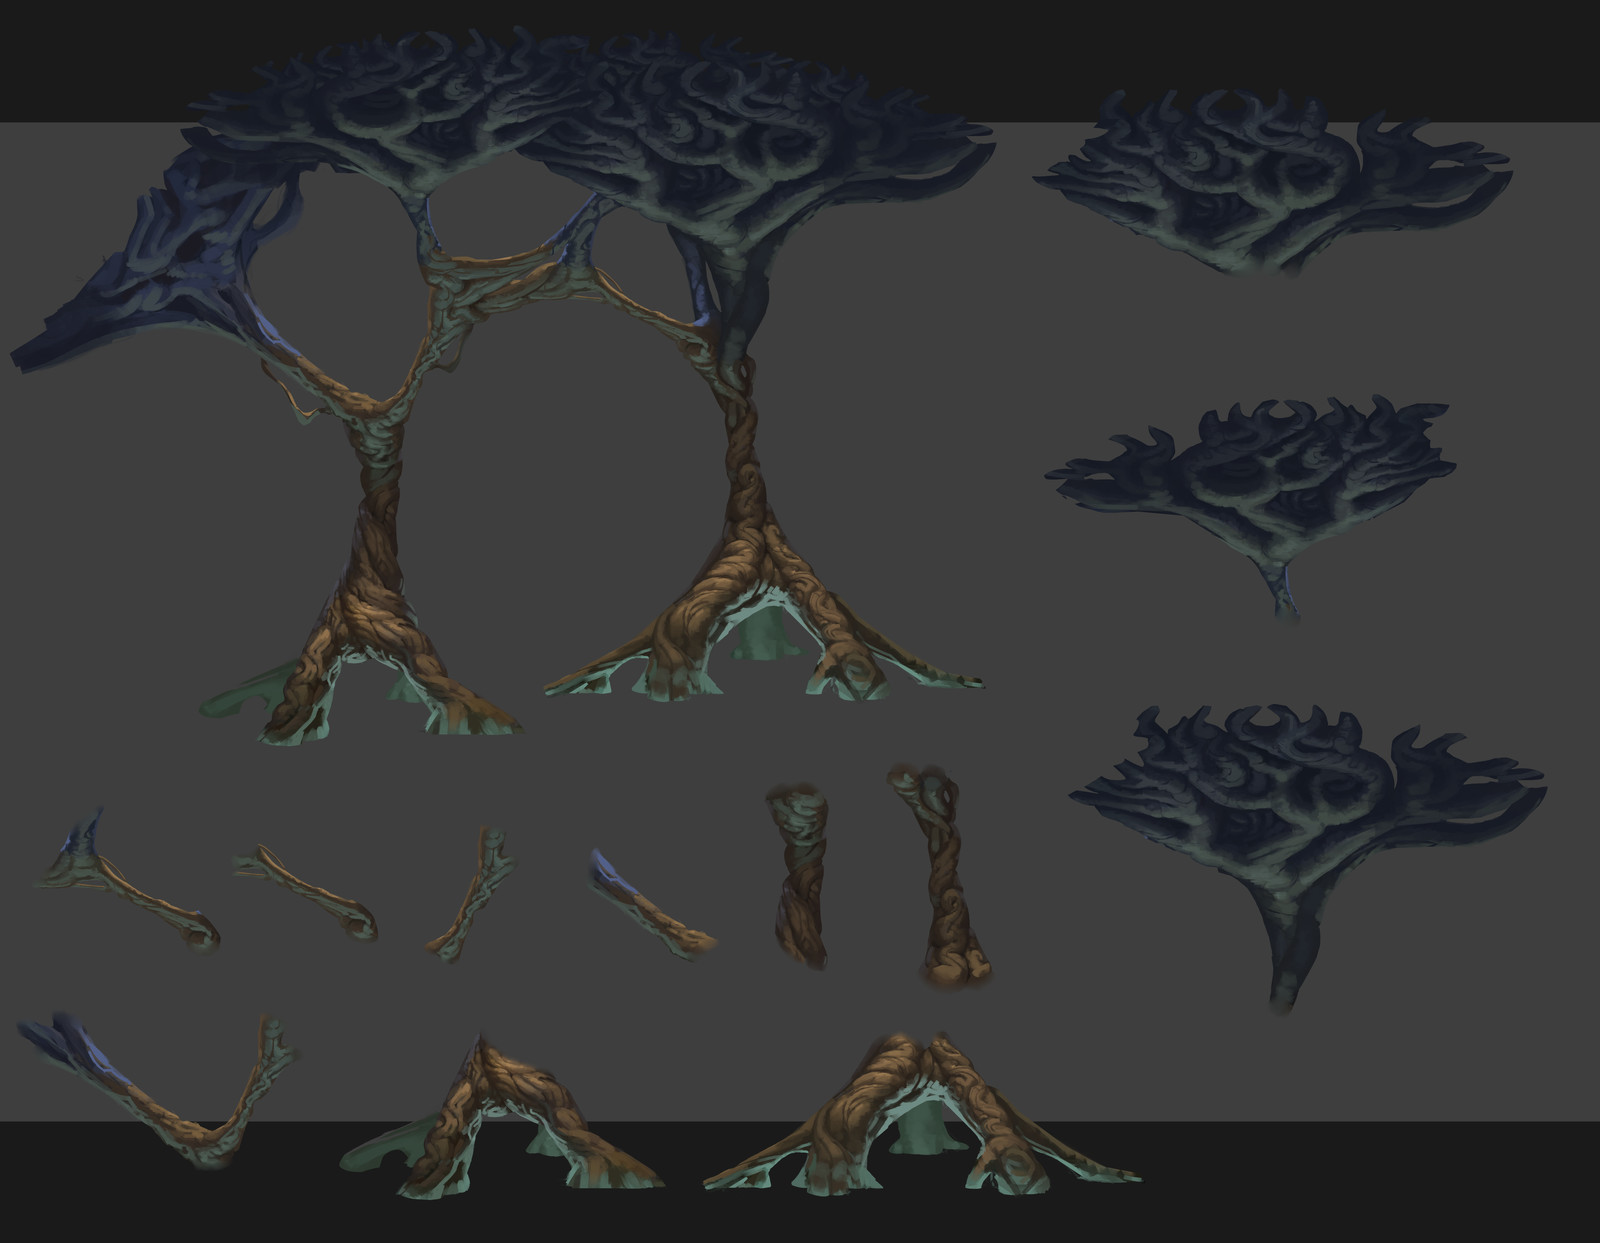 Sprite Sheet for the Root Pillars